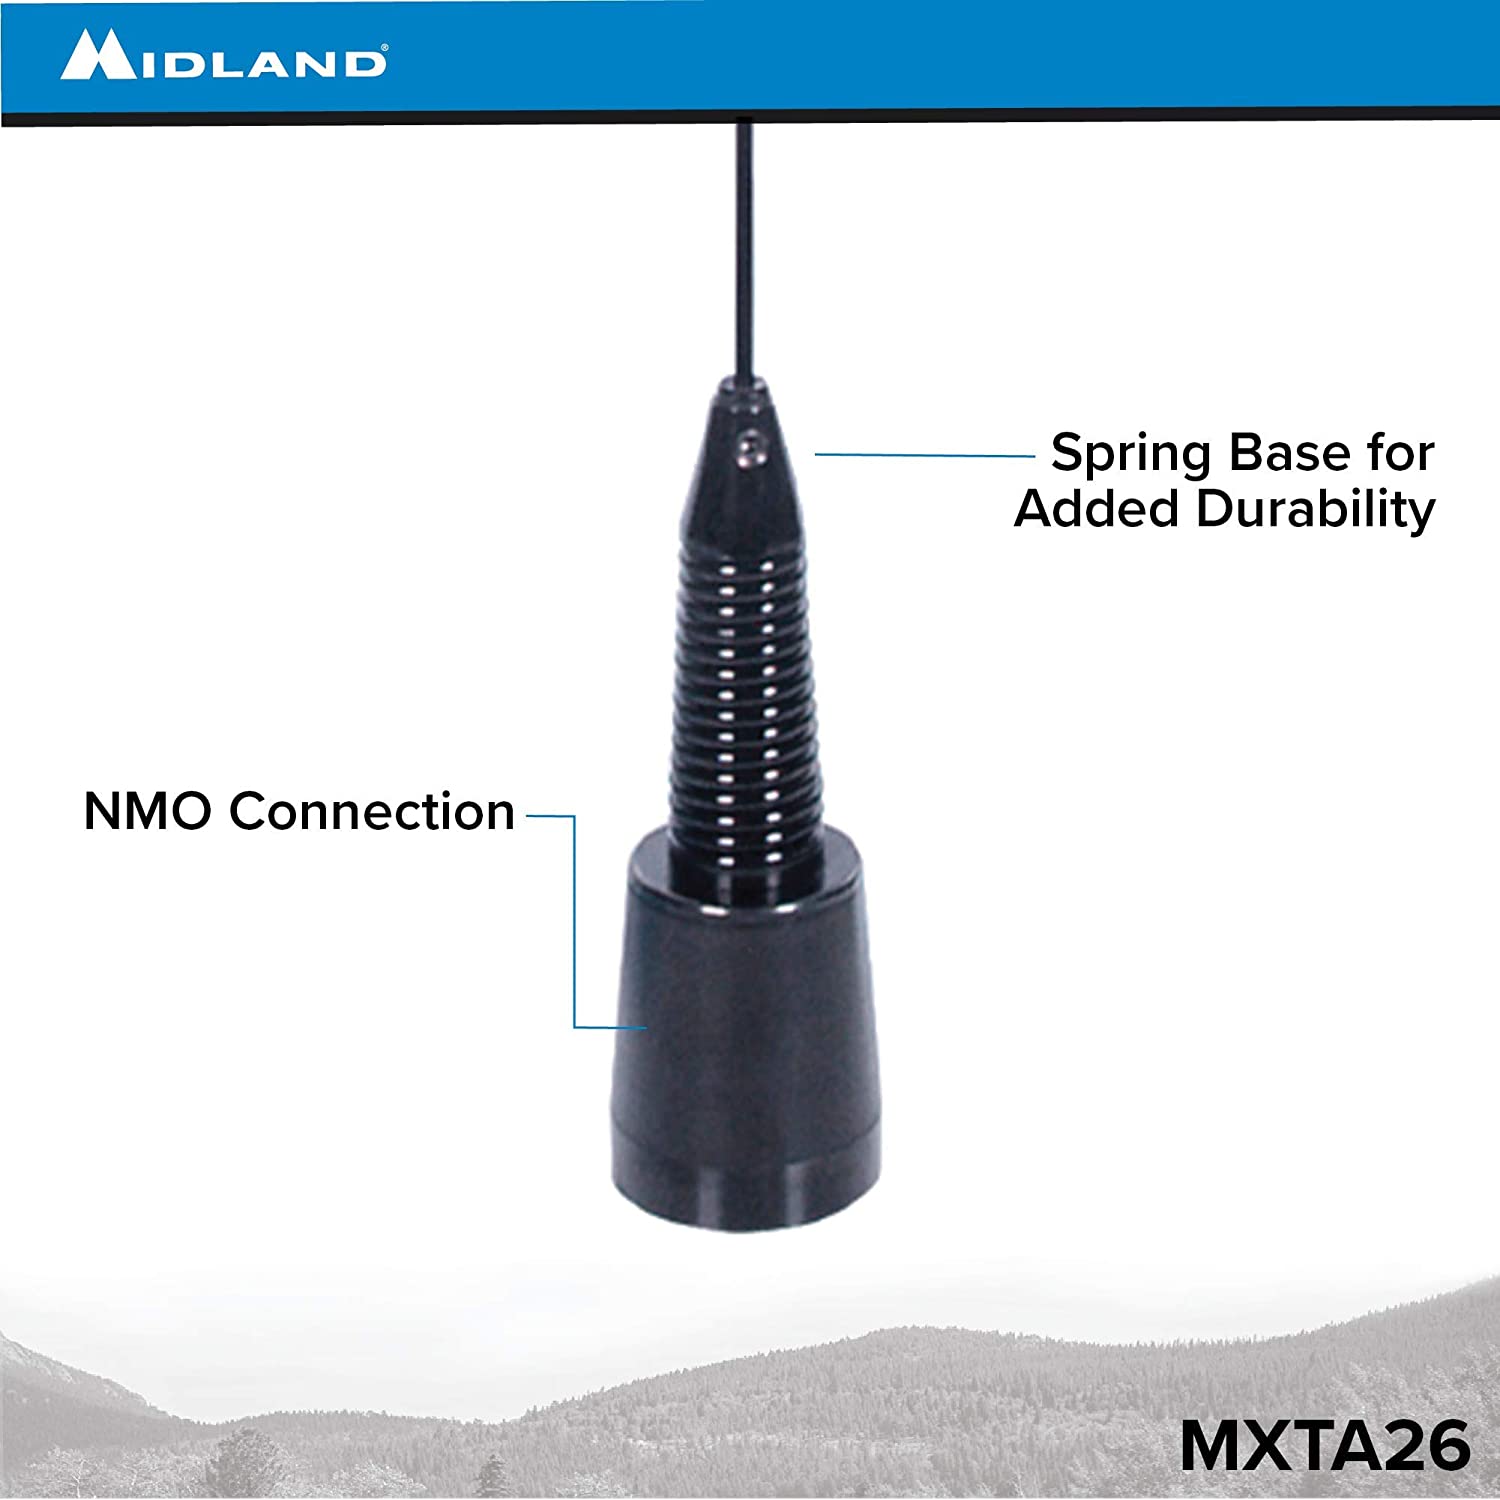 Midland 6 dB Gain Antenna with Durable Spring Base and NMO Connection 